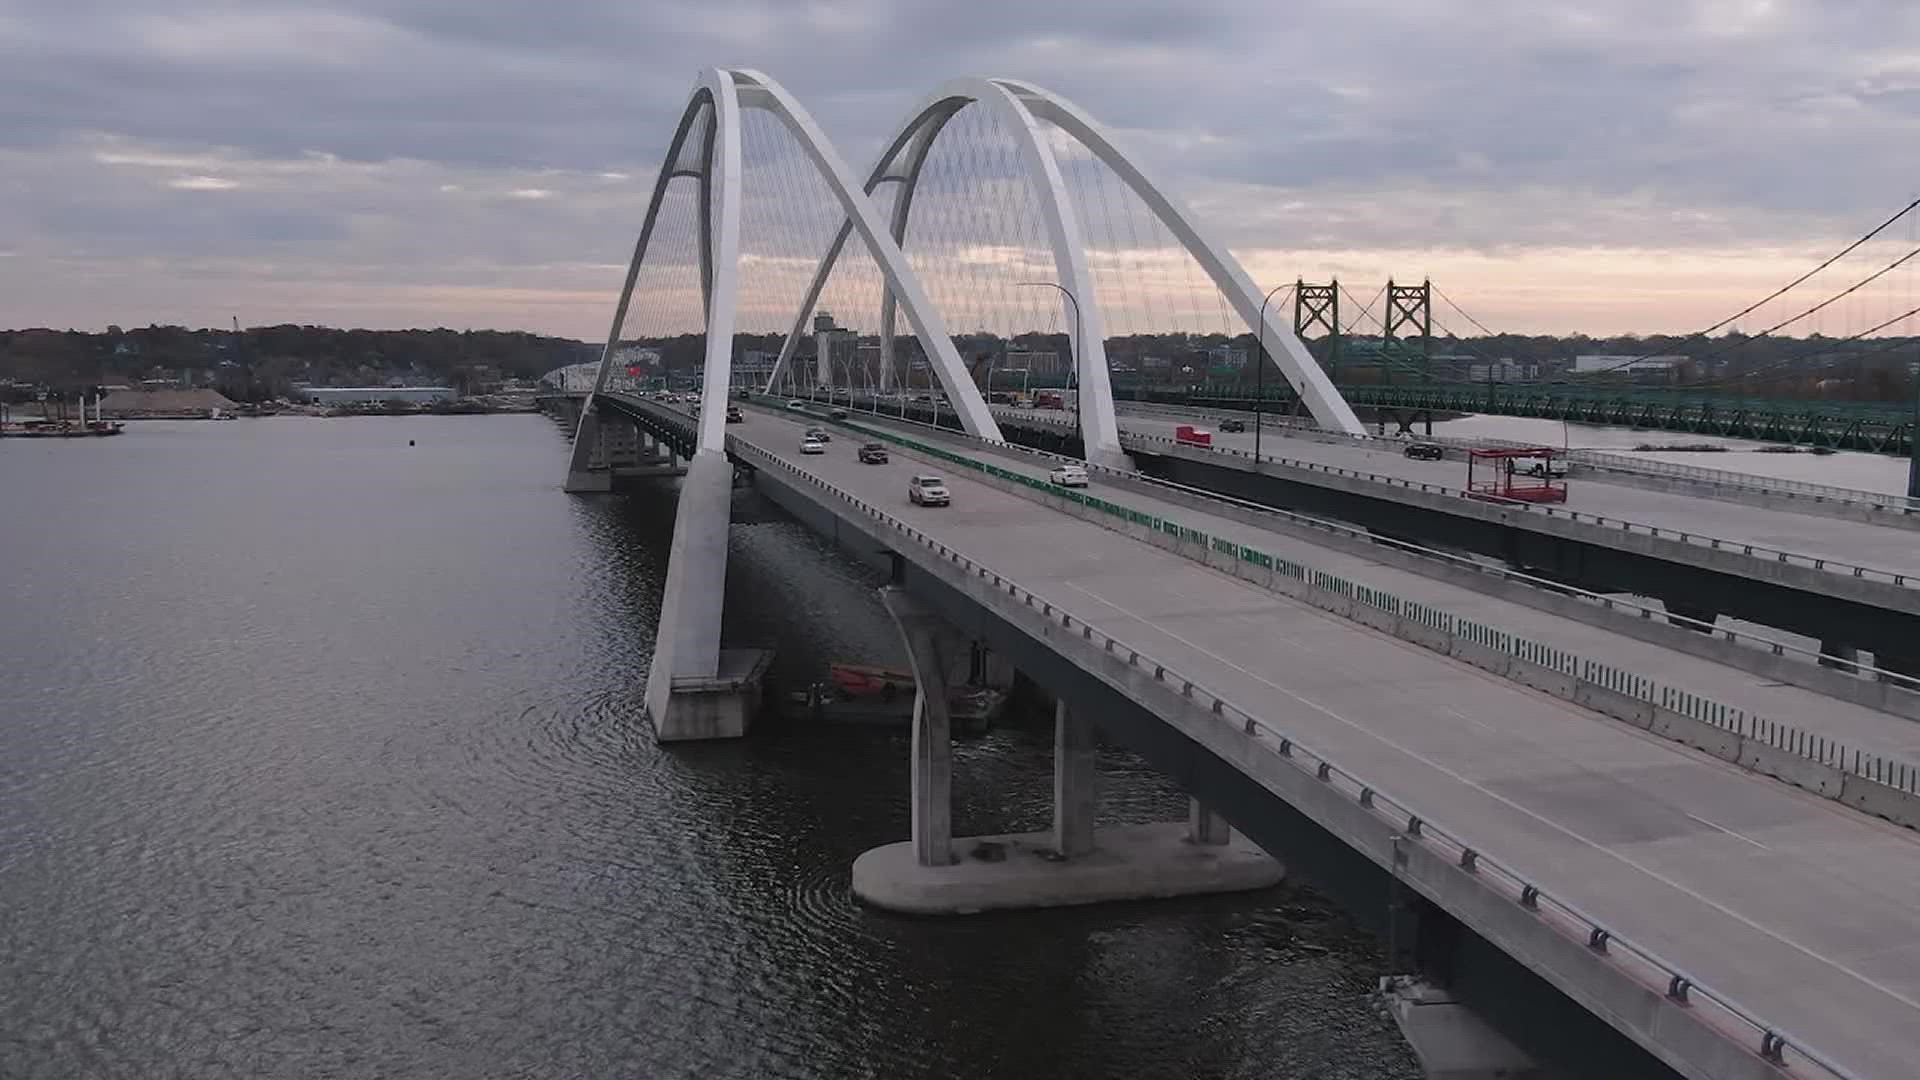 The public can walk across the new I-74 bridge after an opening ceremony on Wednesday.